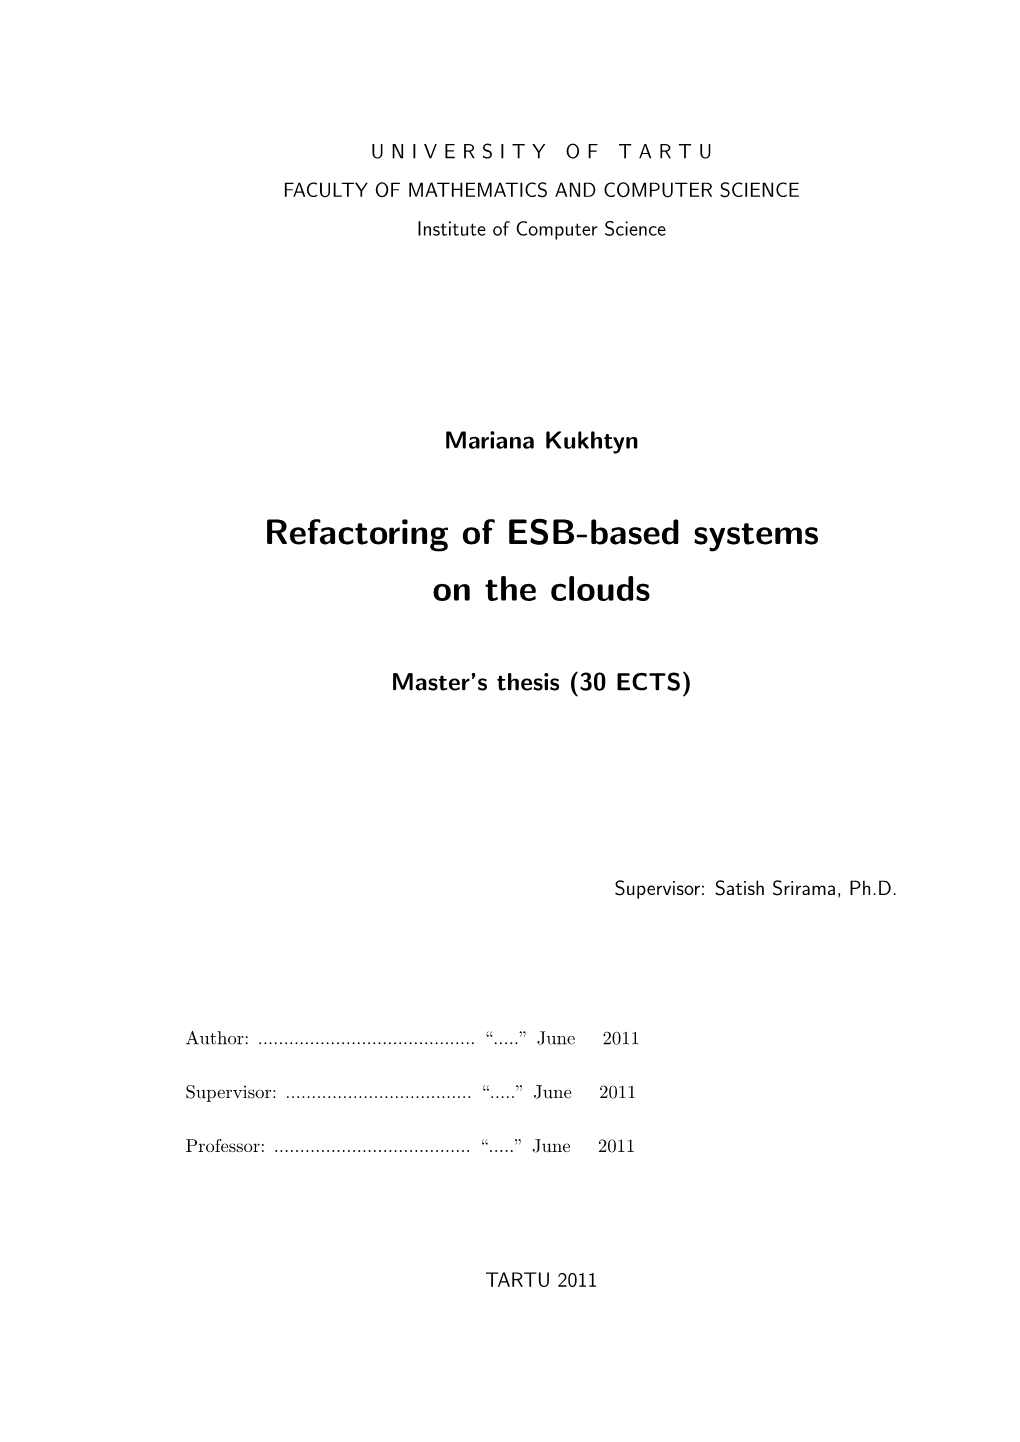 Refactoring of ESB-Based Systems on the Clouds